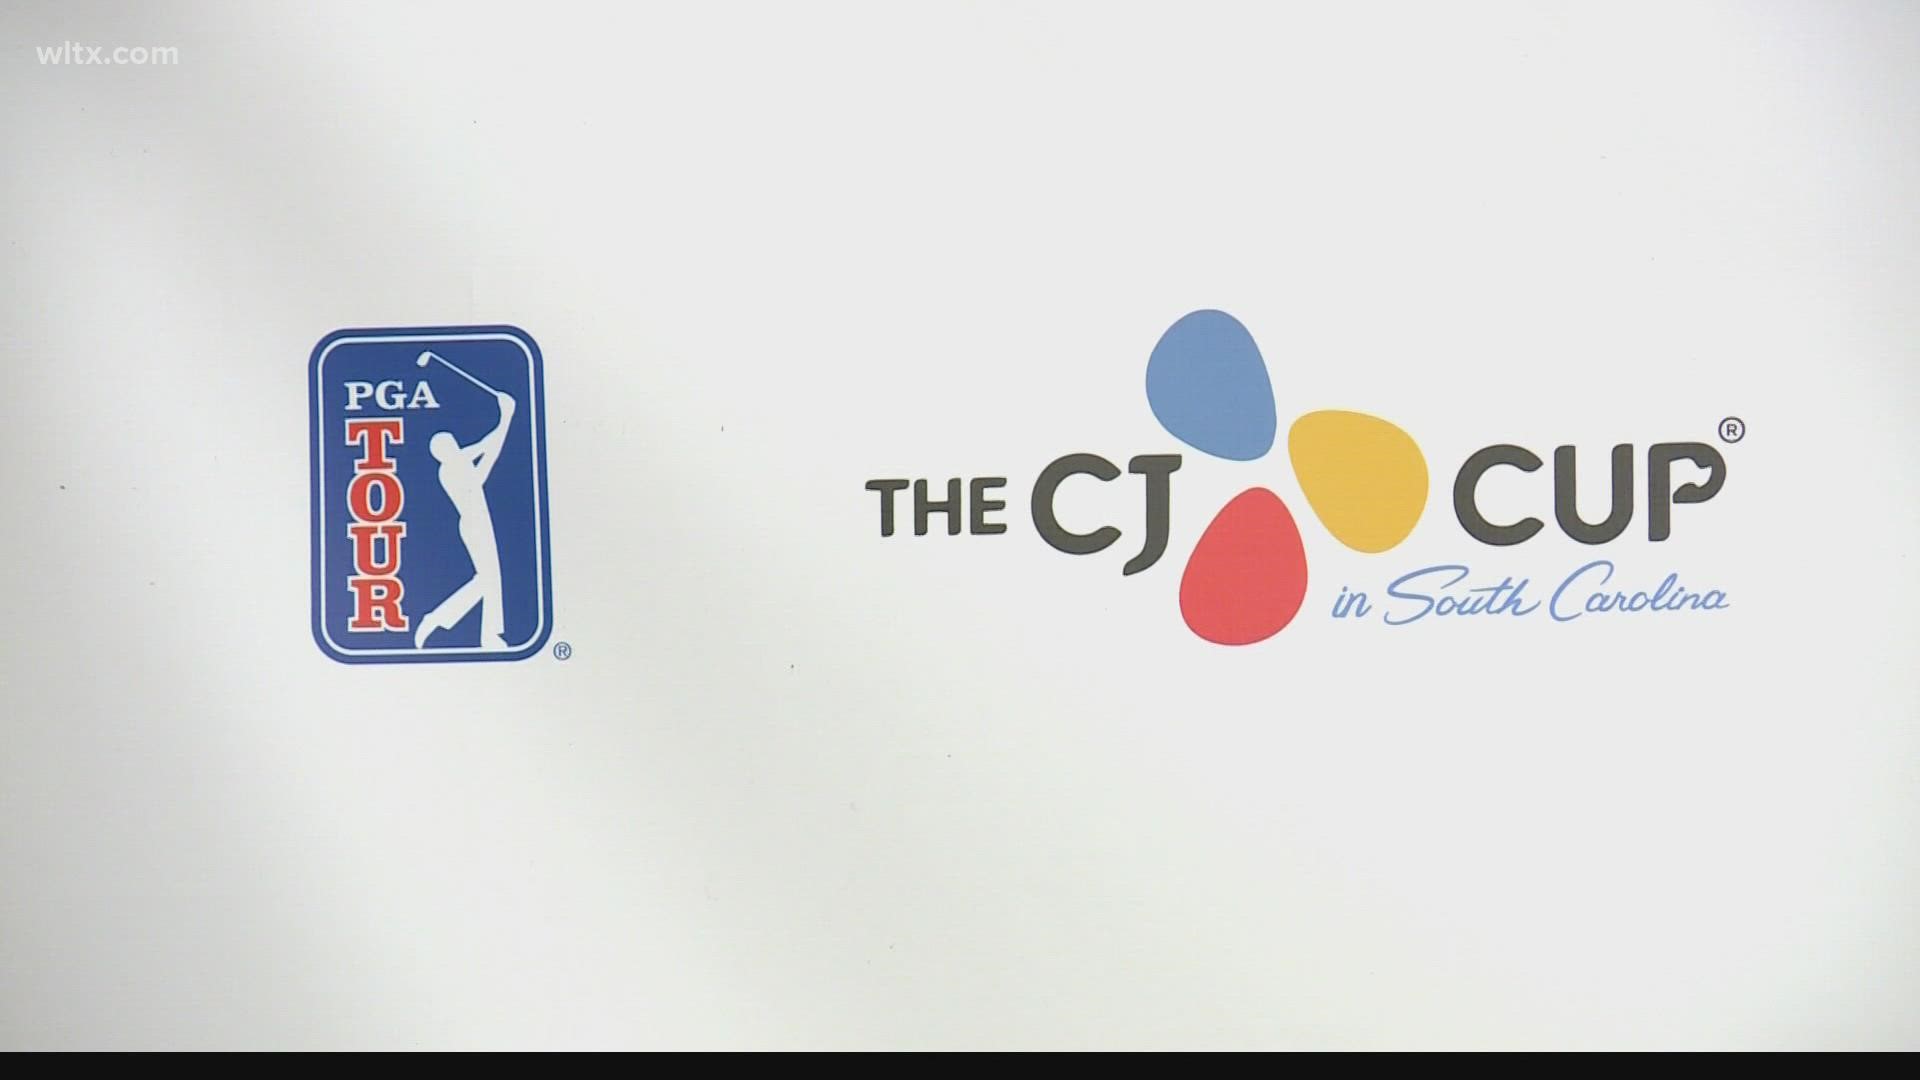 South Carolina welcomes the PGA Tour in October wltx